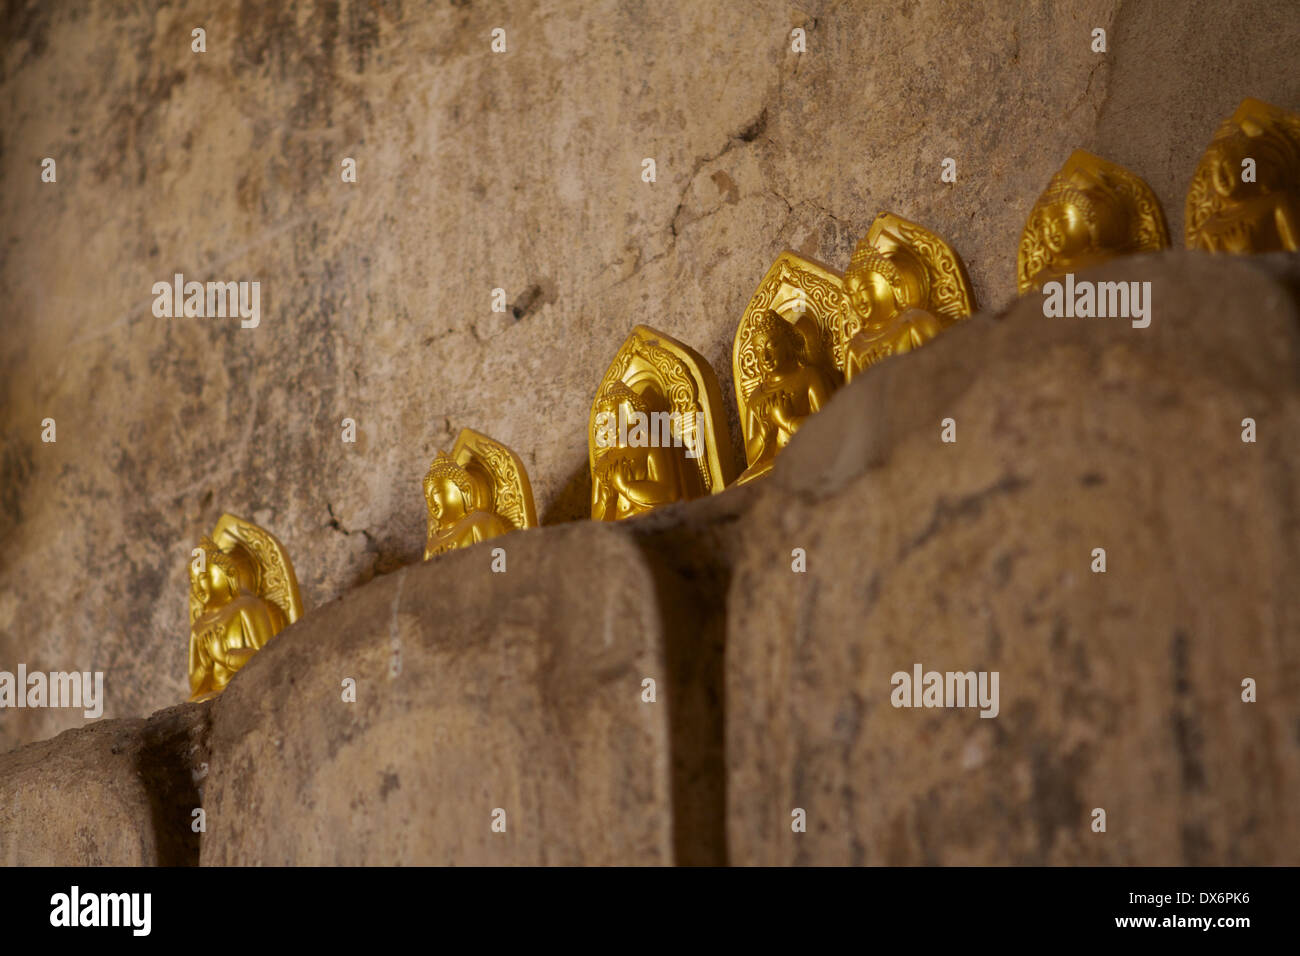 Miniature gold coloured Buddhas left as offerings to Buddha at Shwegugyi Temple meaning 'the Golden Cave' (a.k.a. Nandaw Oo Stock Photo